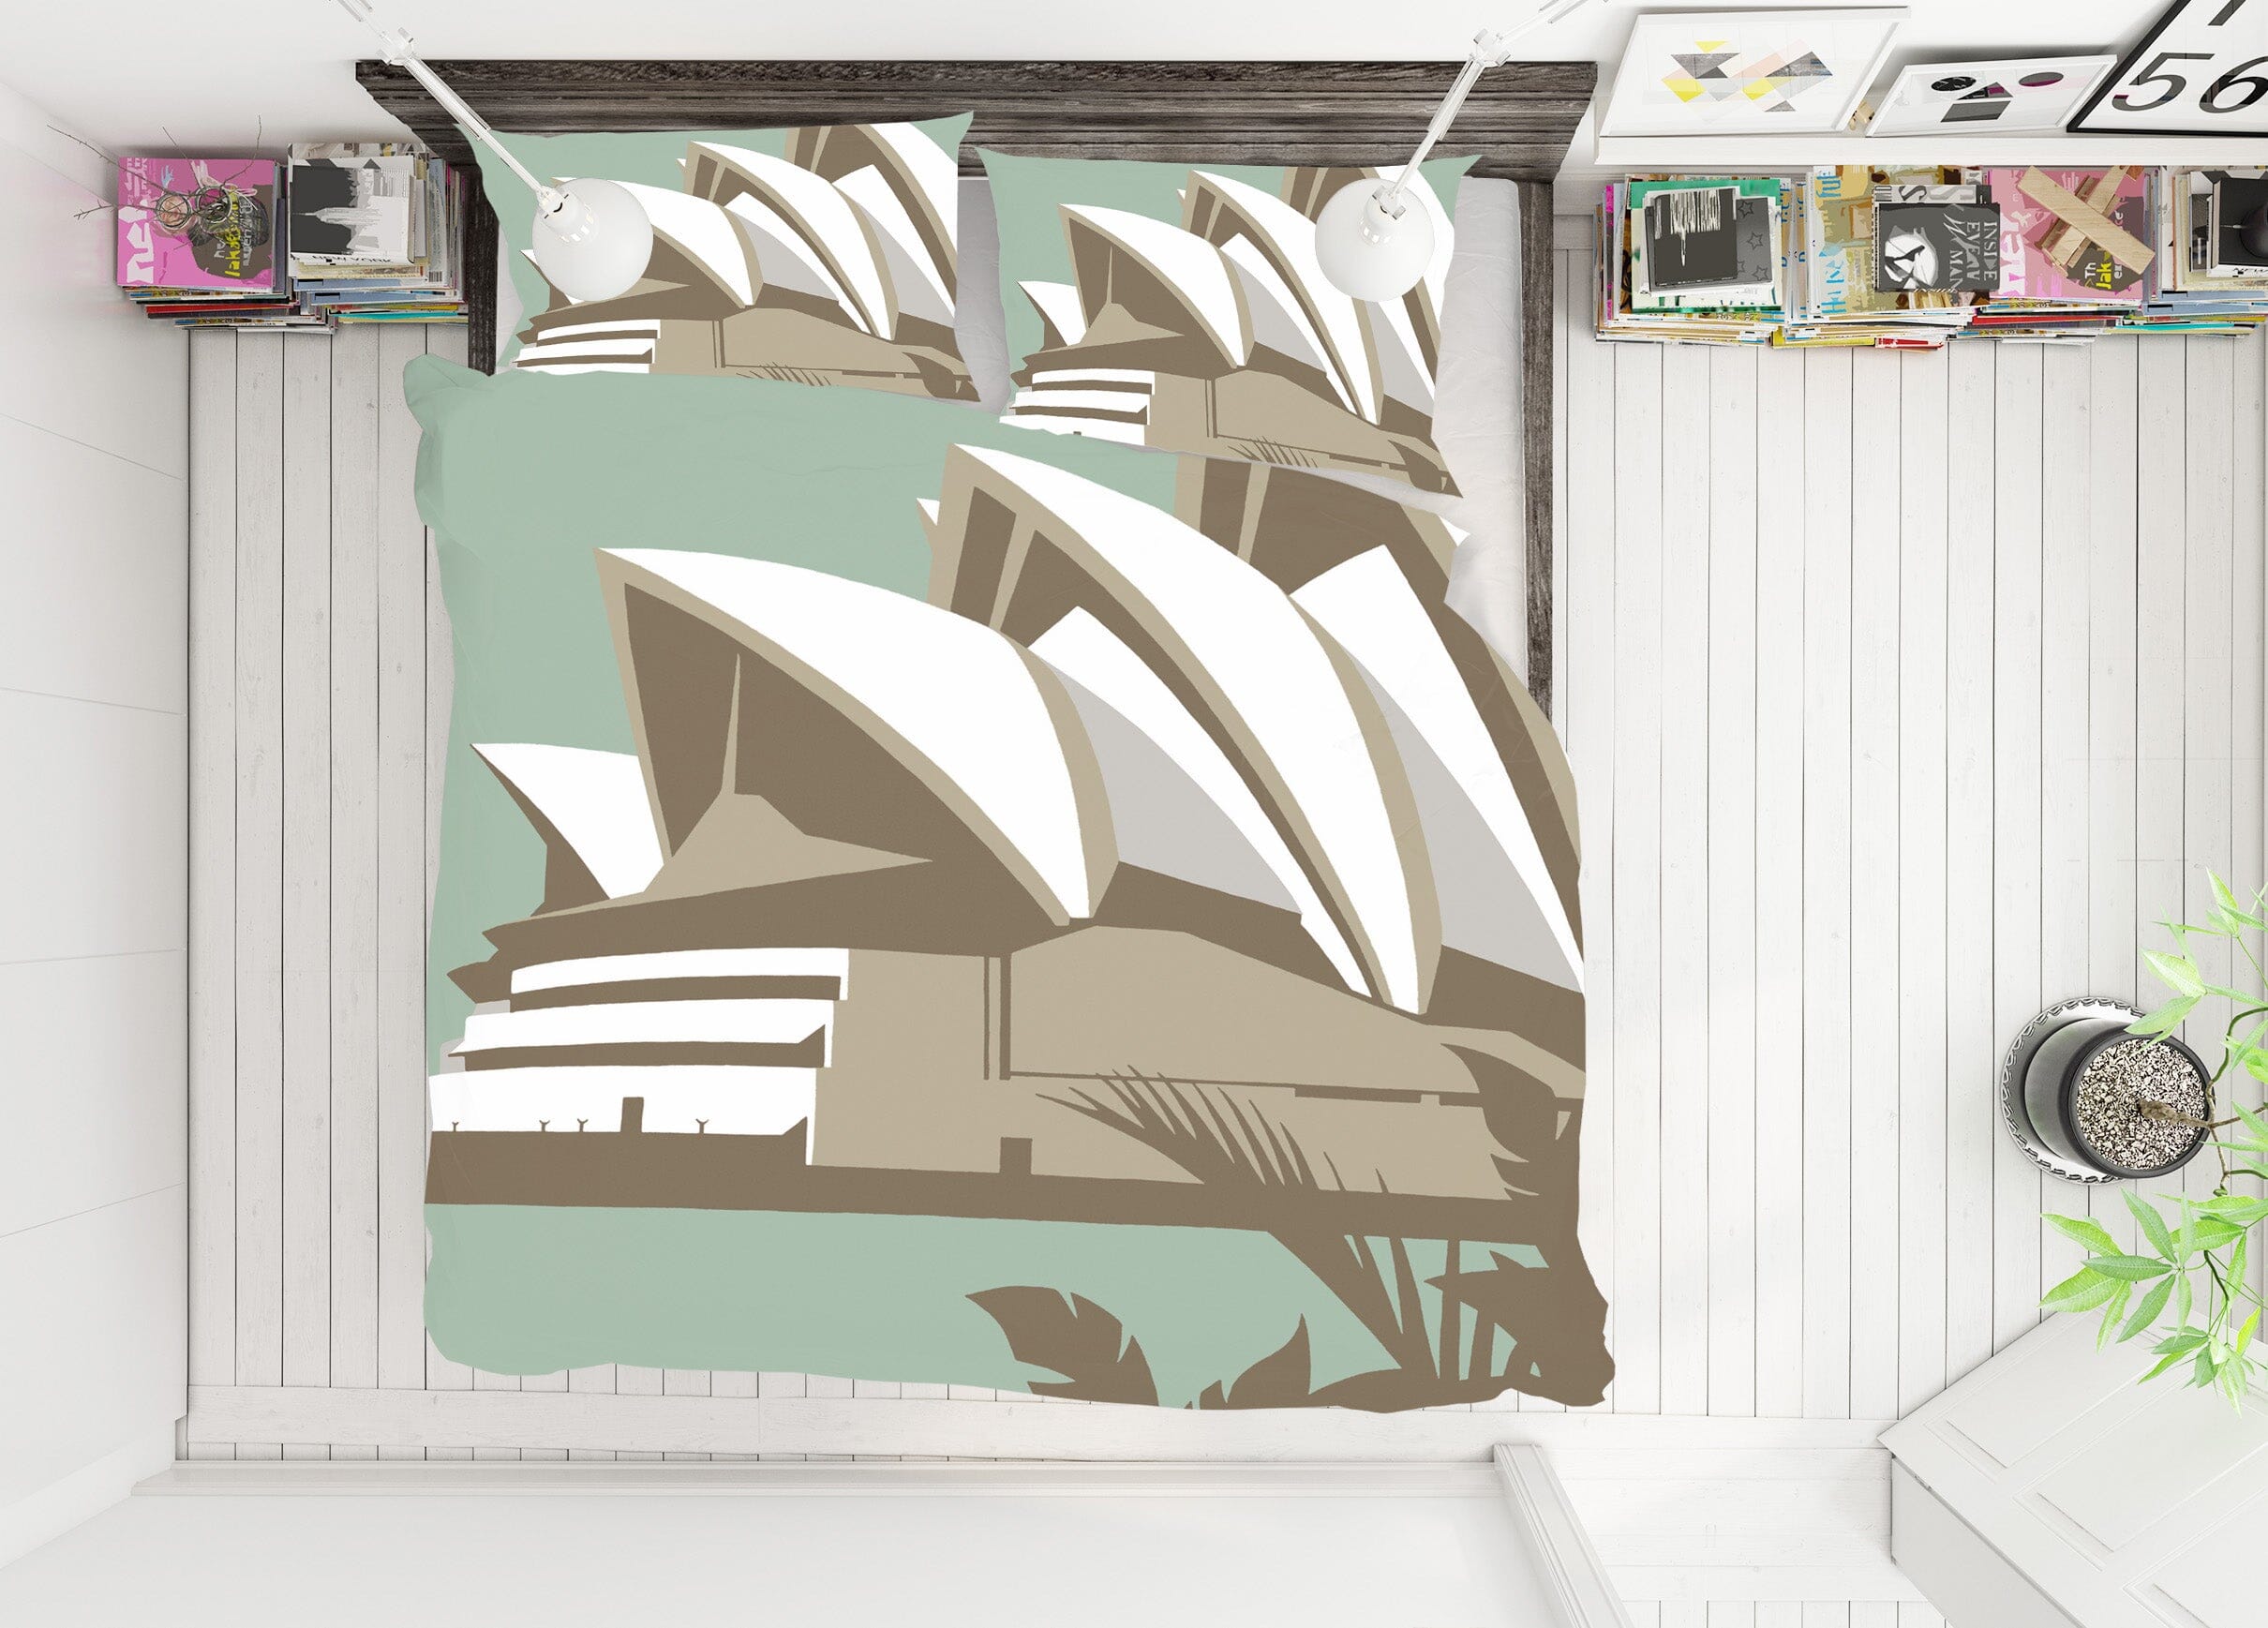 3D Sydney Opera House 2073 Steve Read Bedding Bed Pillowcases Quilt Quiet Covers AJ Creativity Home 